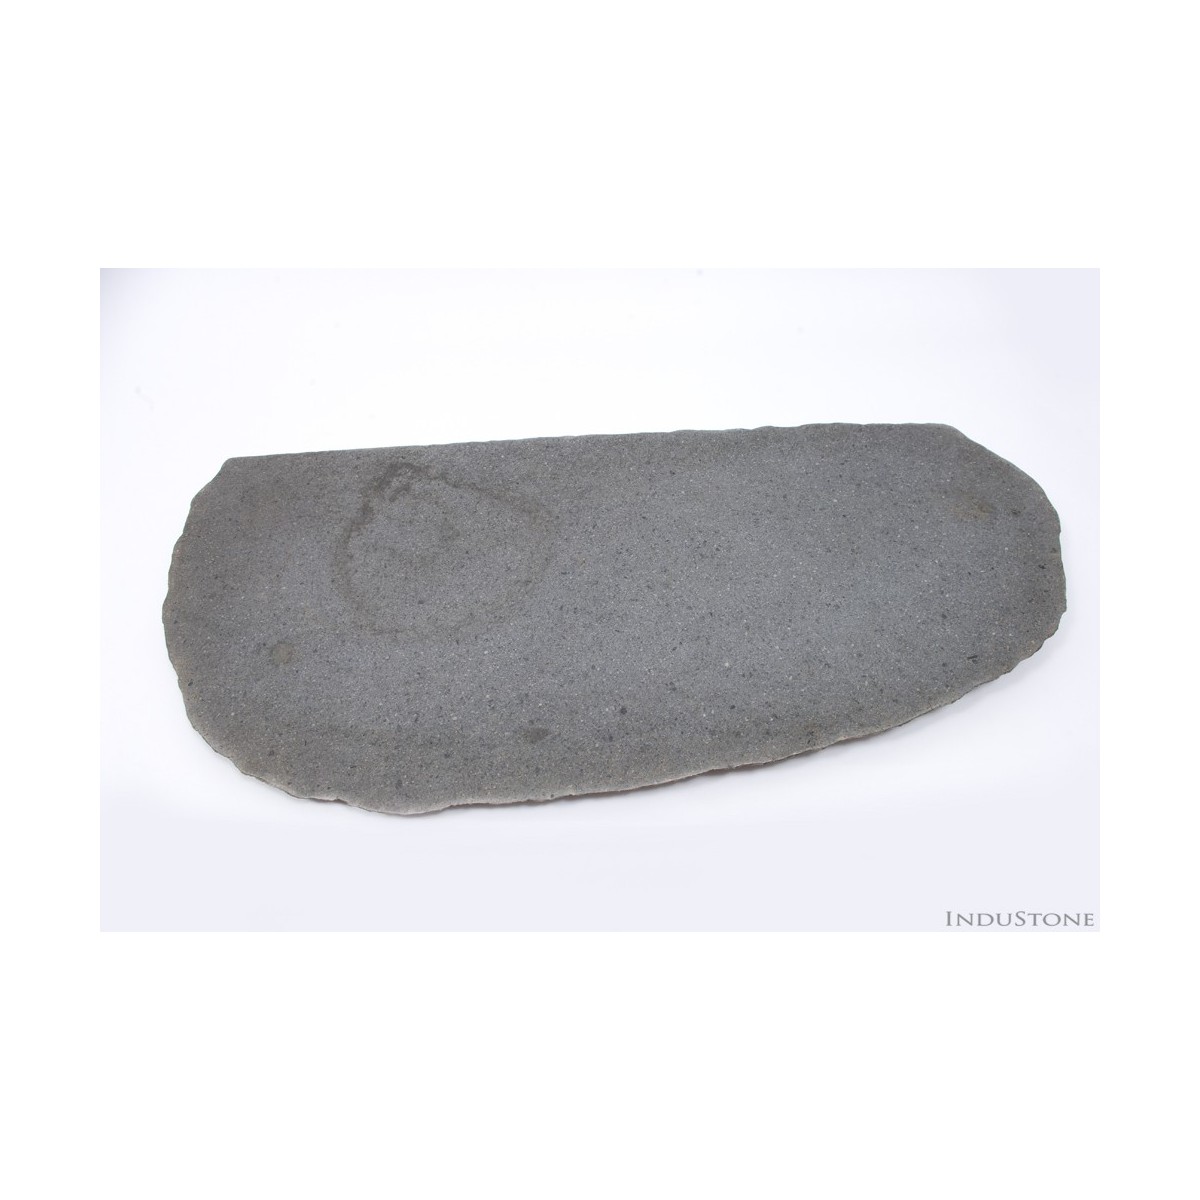 RIVER STONE B plateau from Indonesia  INDUSTONE